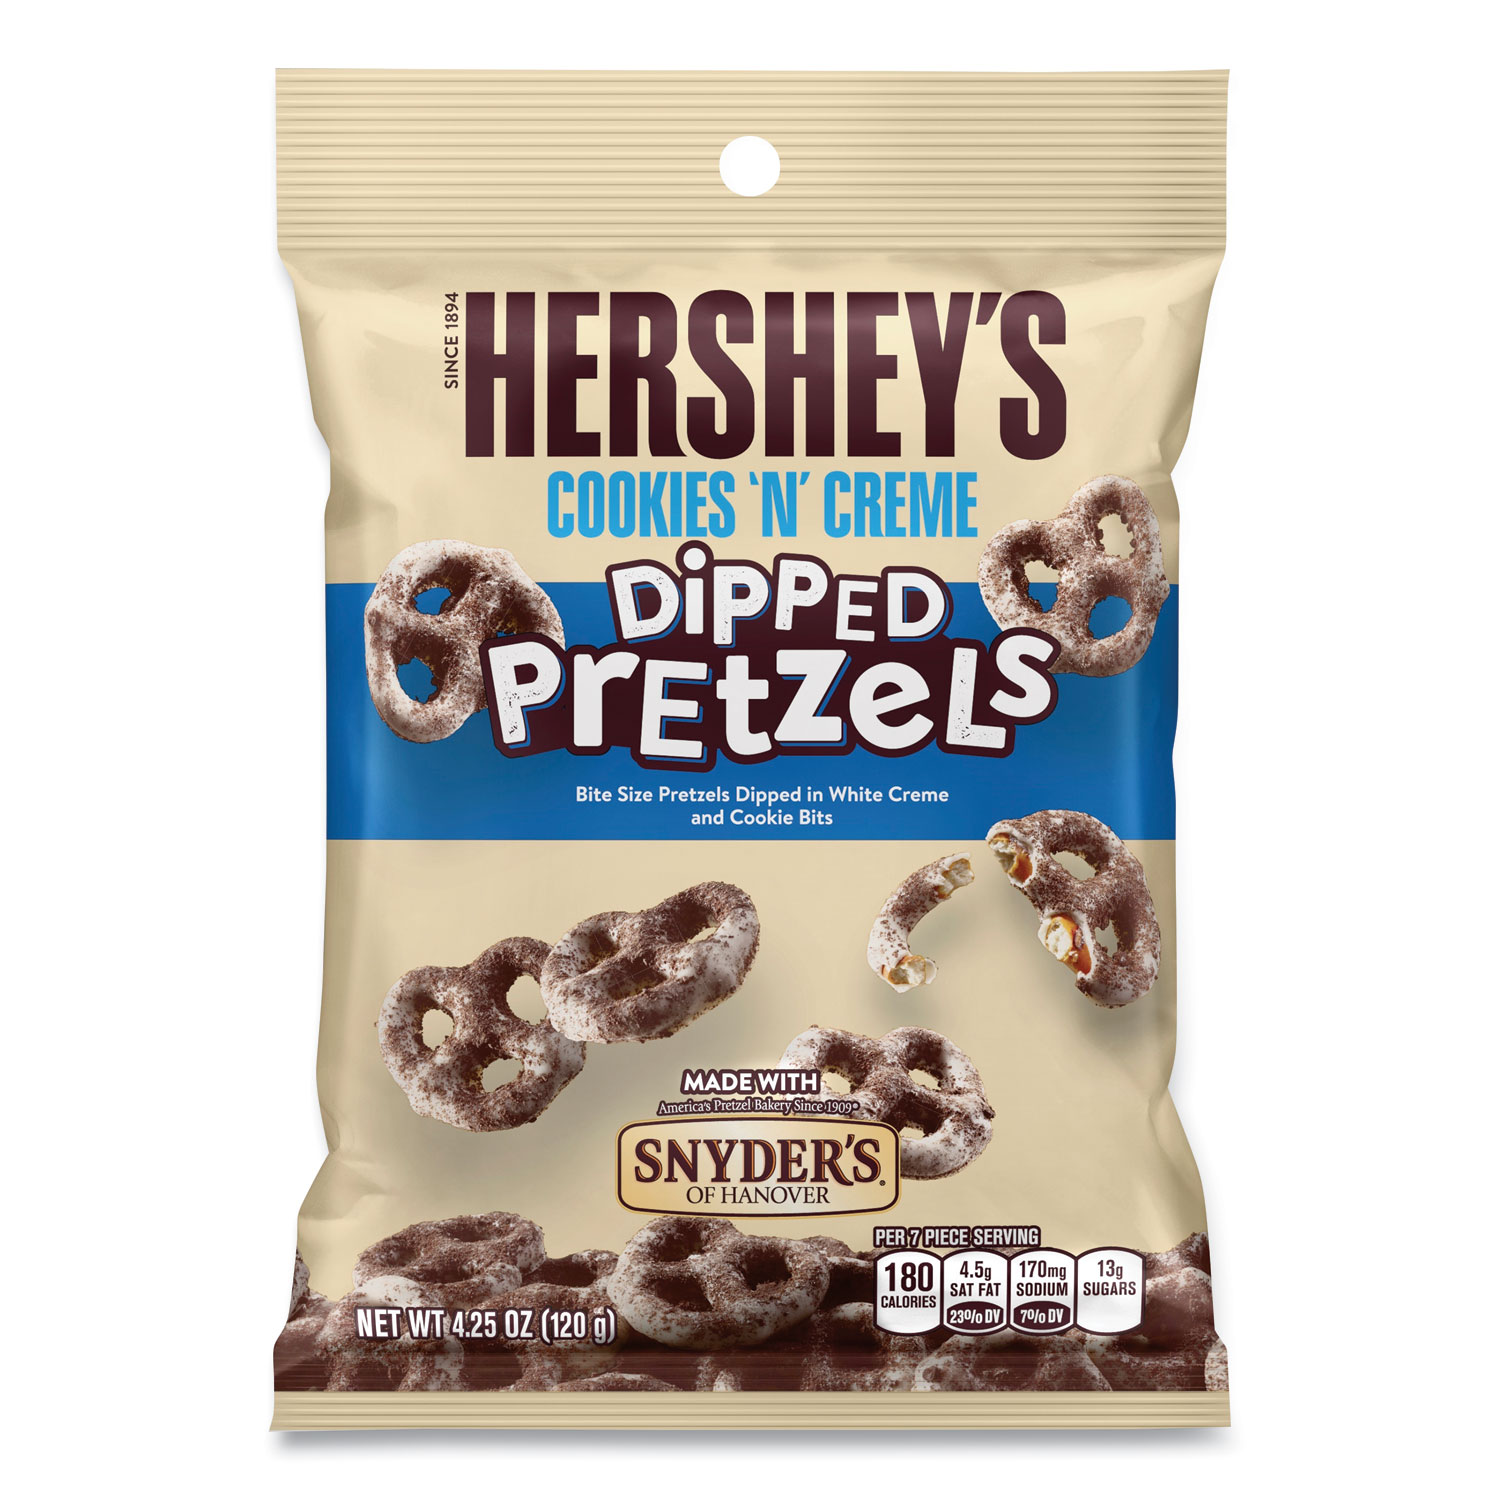  Hershey's 21462 Dipped Pretzels, Cookies 'n' Creme, 4.25 oz Bag, 4 Bags/Pack, Free Delivery in 1-4 Business Days (GRR24600290) 